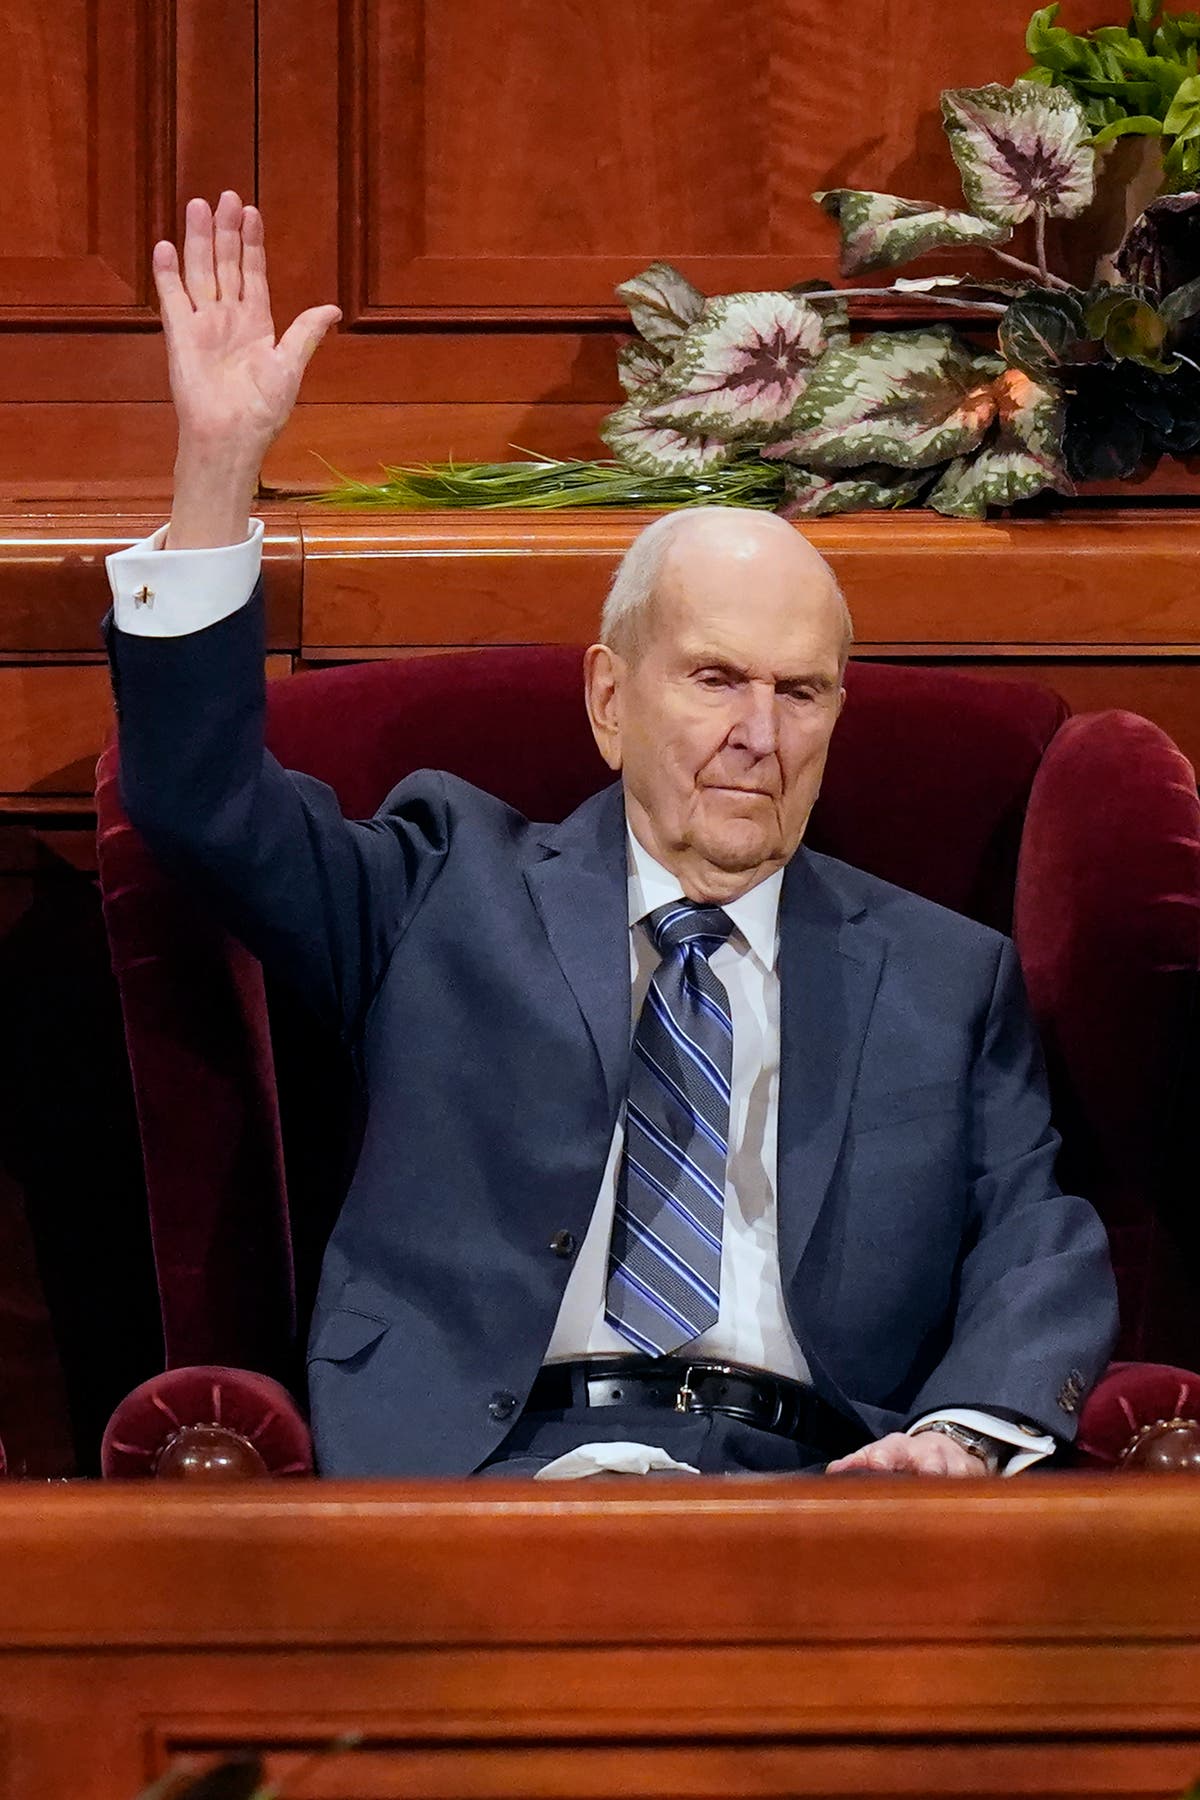 At 97, Mormon president becomes oldest in church history